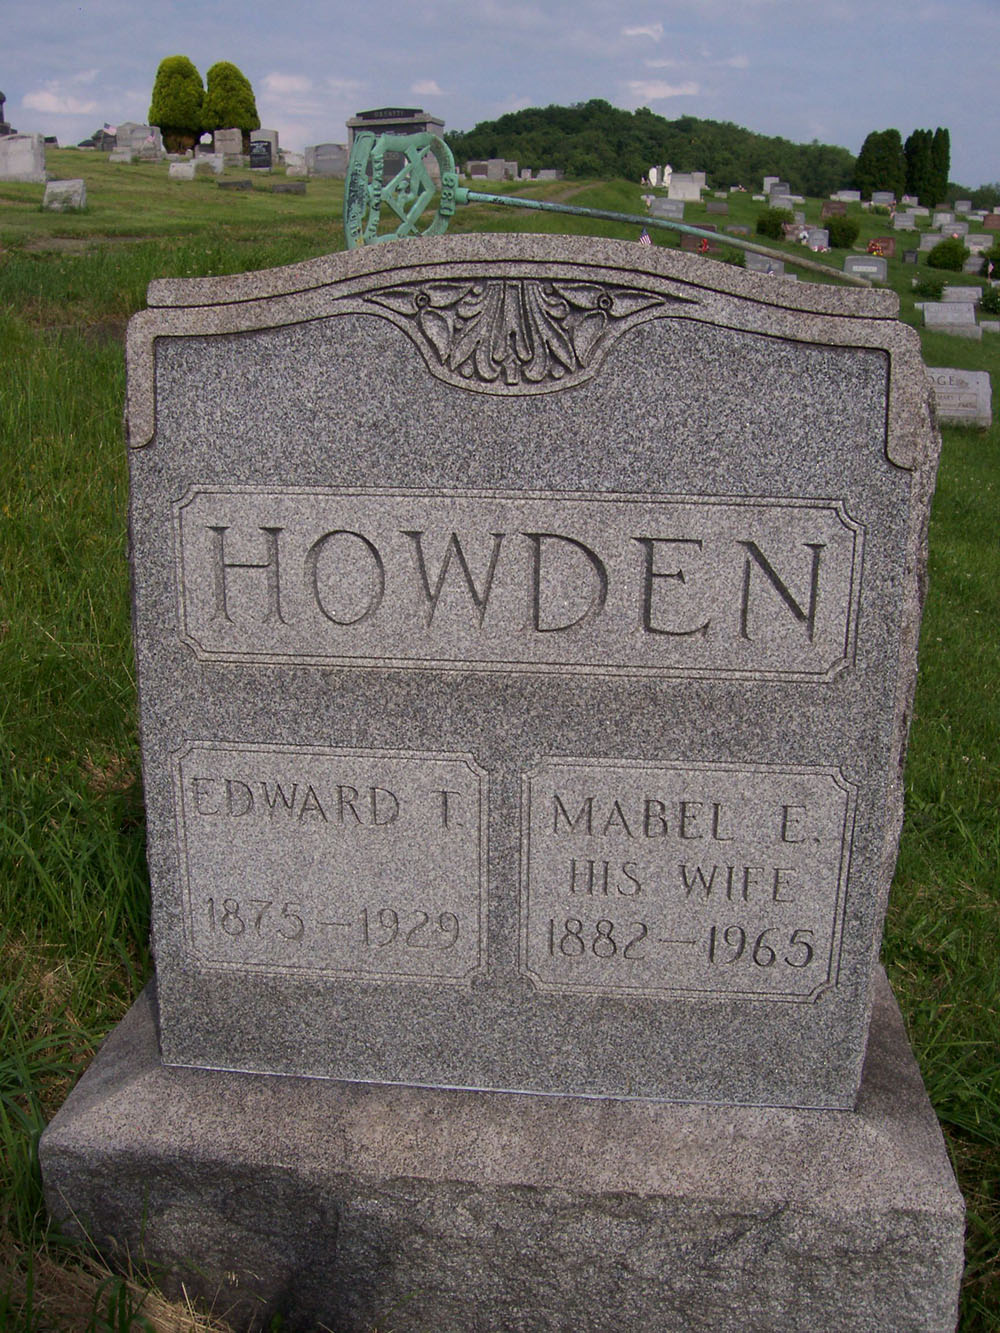 Edward and Mabel Howden